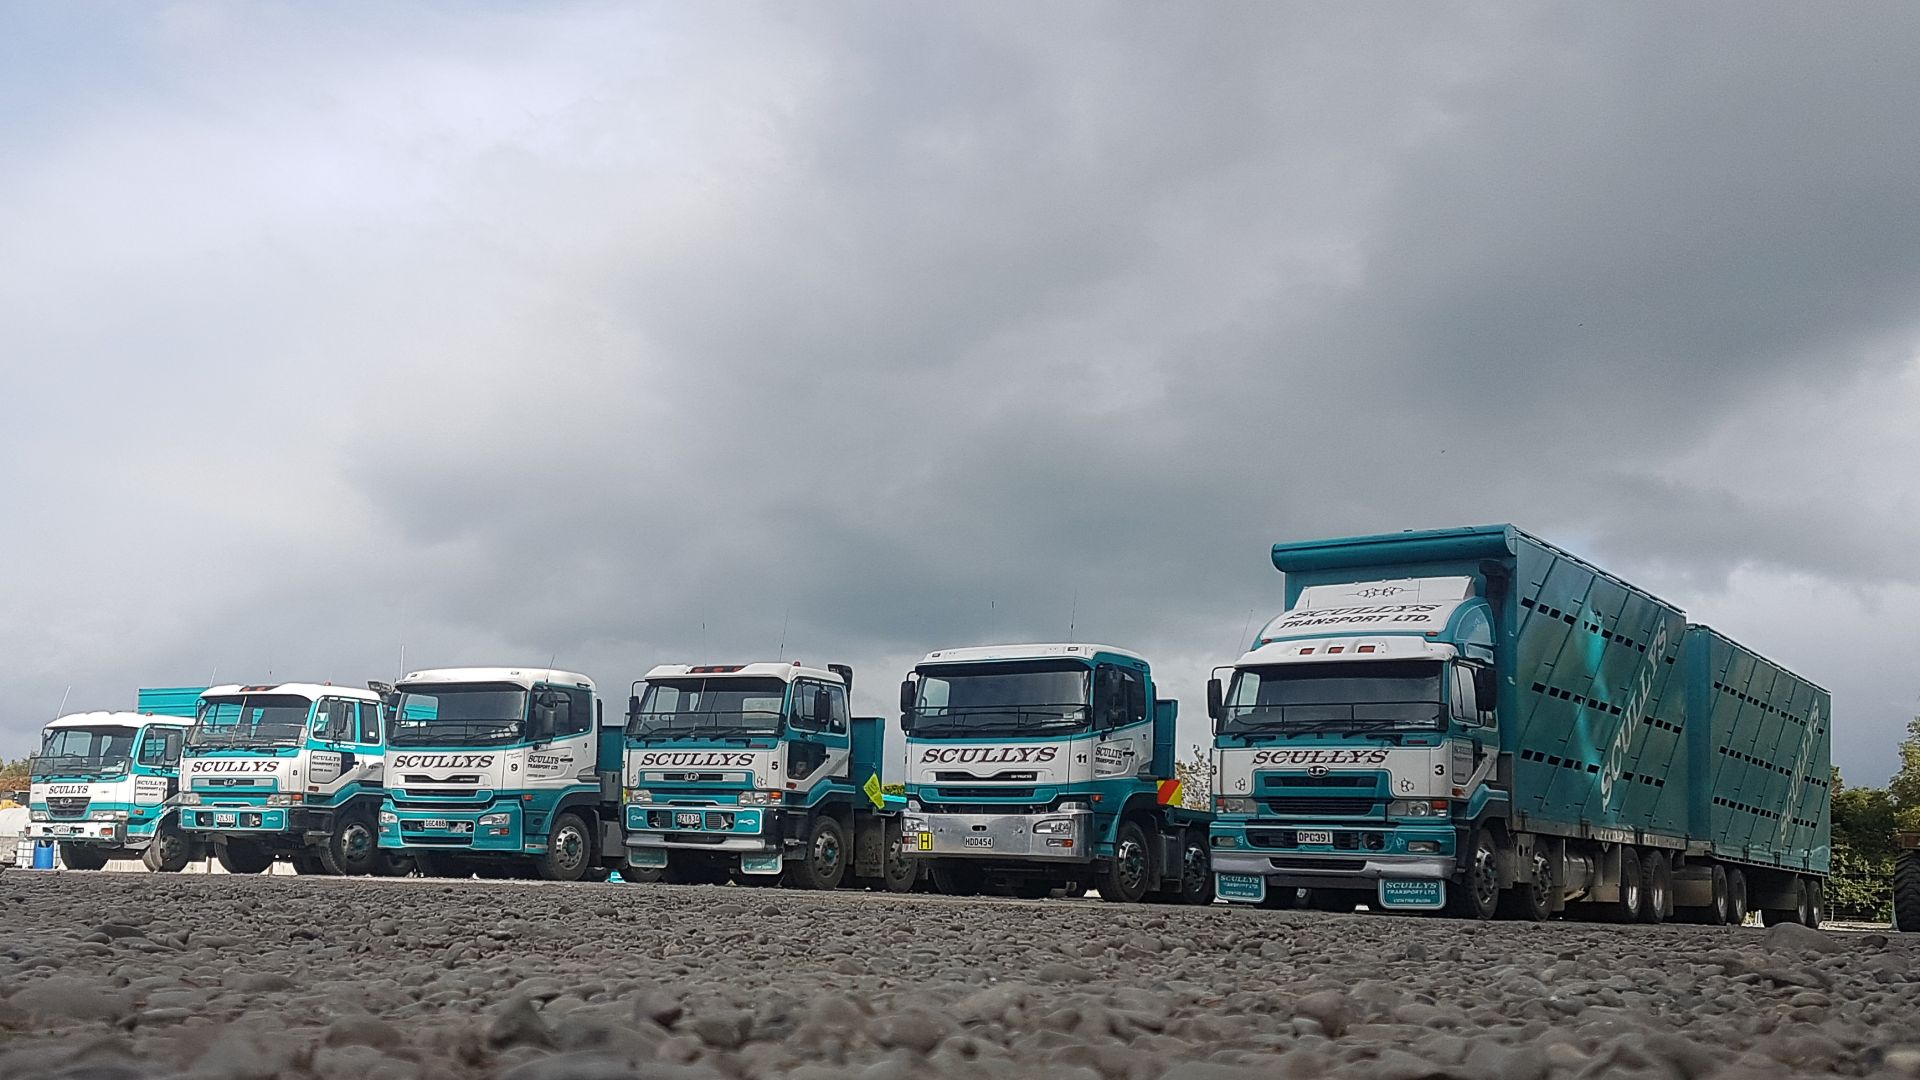 Scullys Transport truck line up.